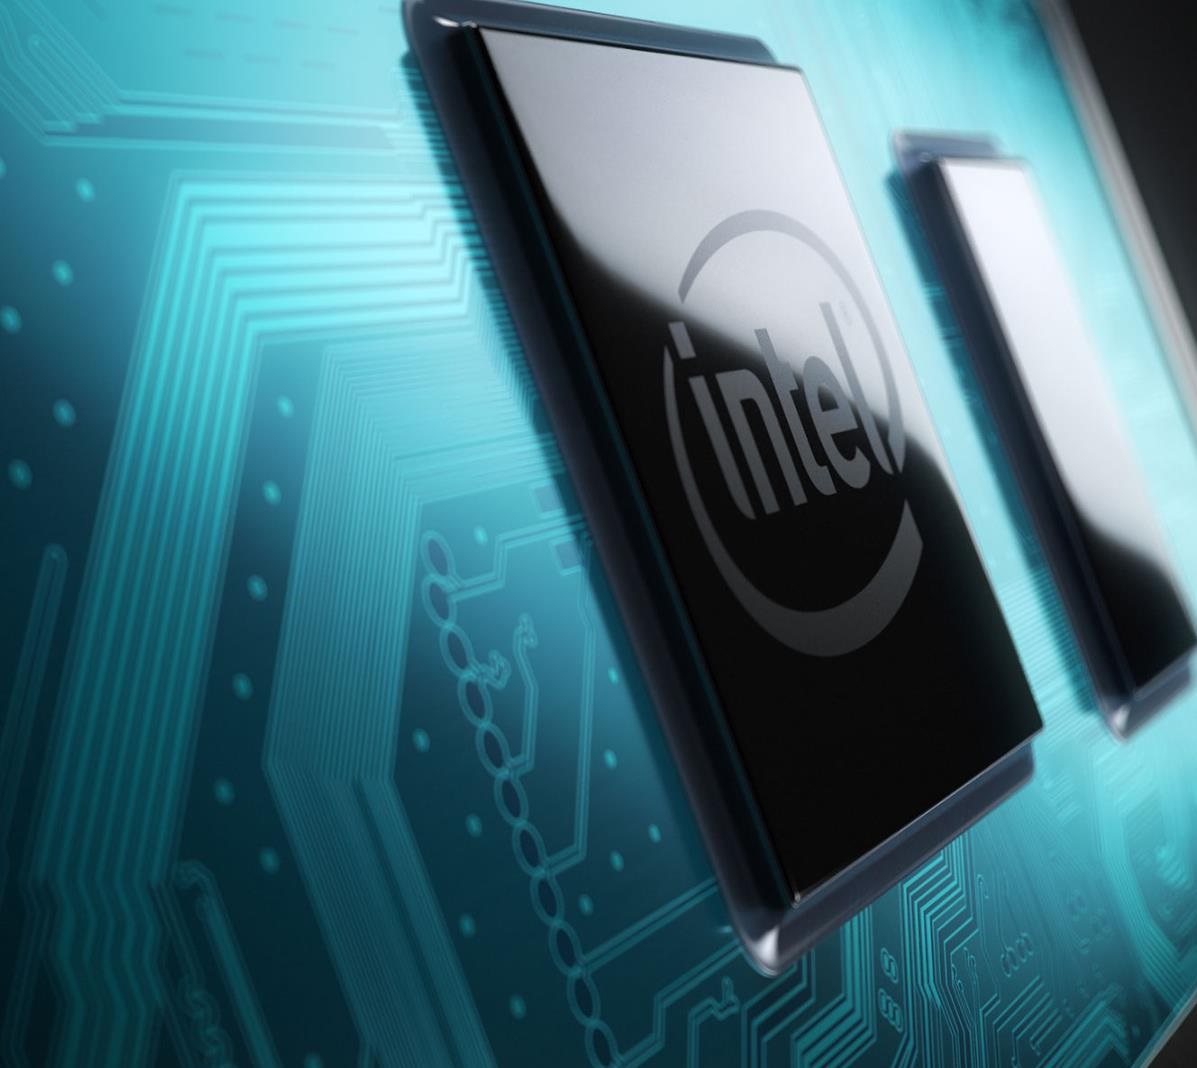 Intel Launches Four New Tiger Lake Desktop Processors For Small Form